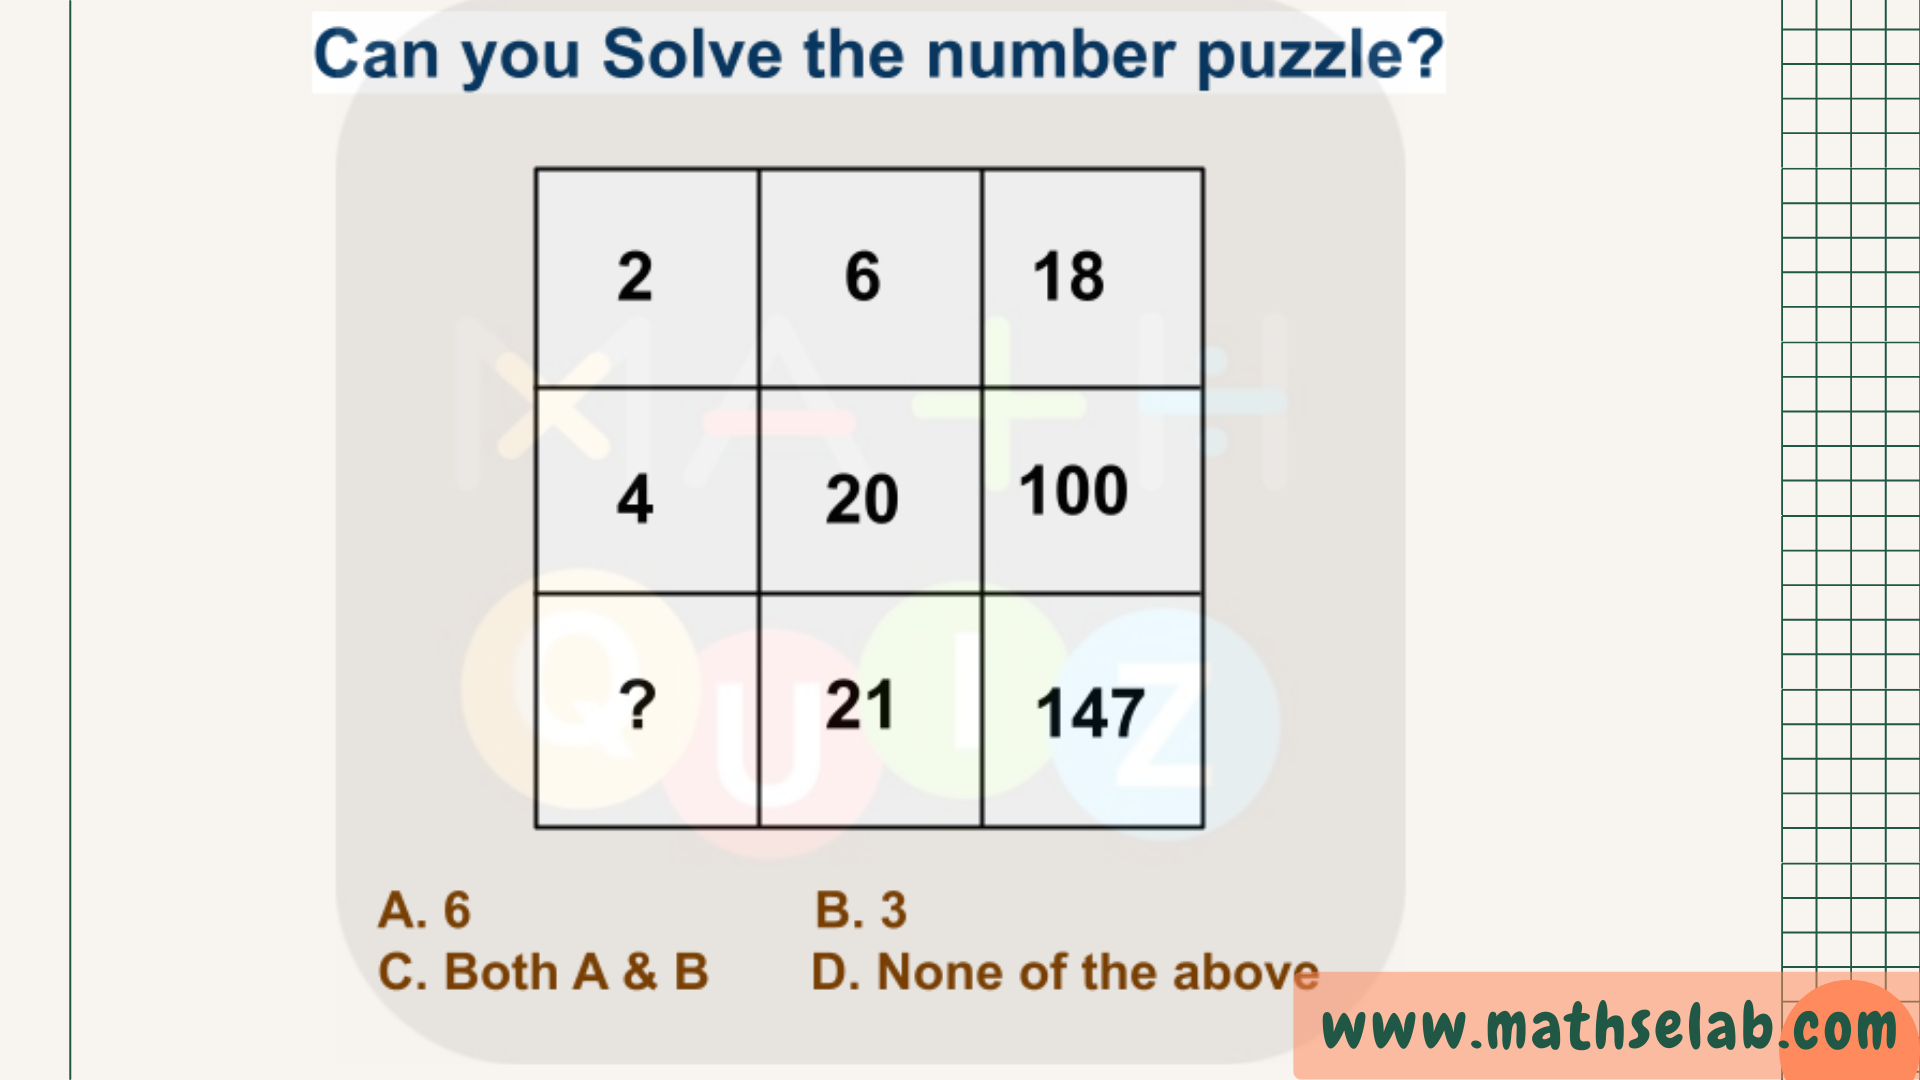 Can you solve the missing number?